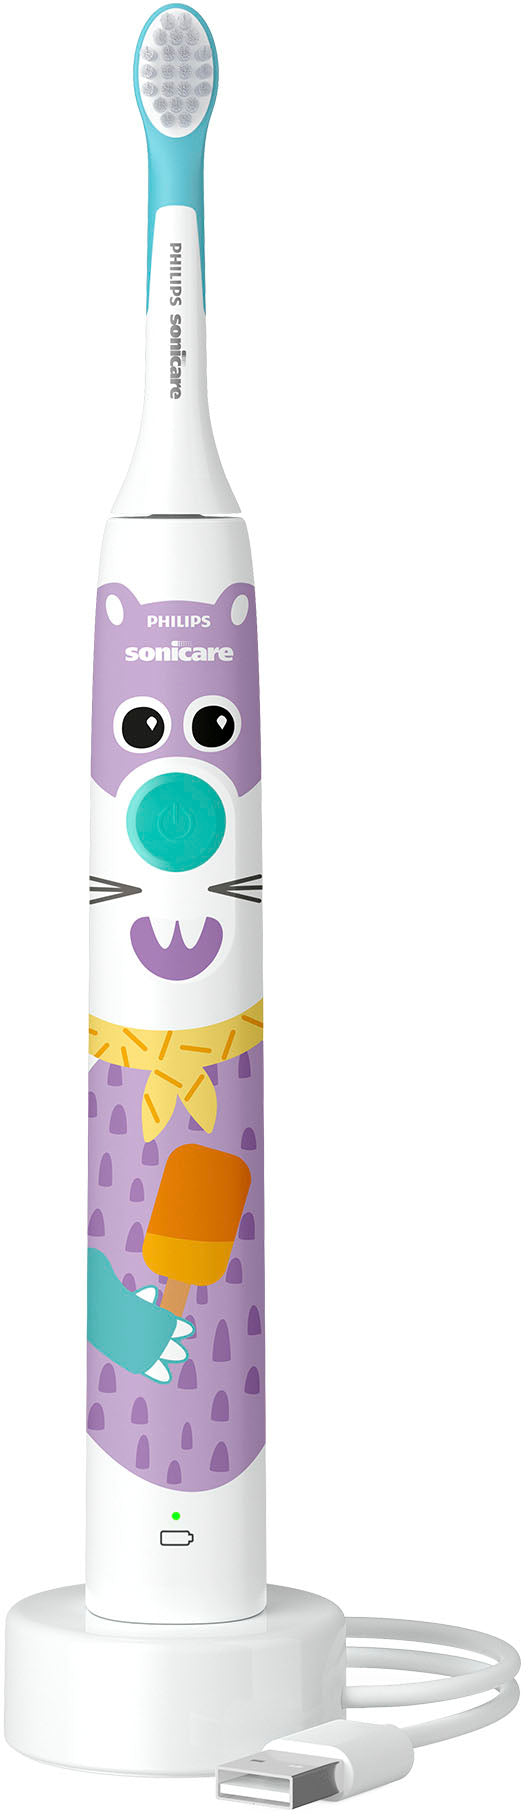 Philips Sonicare - Sonicare for Kids Design a Pet Edition Electric Toothbrush - White With Aqua Blue Button_5